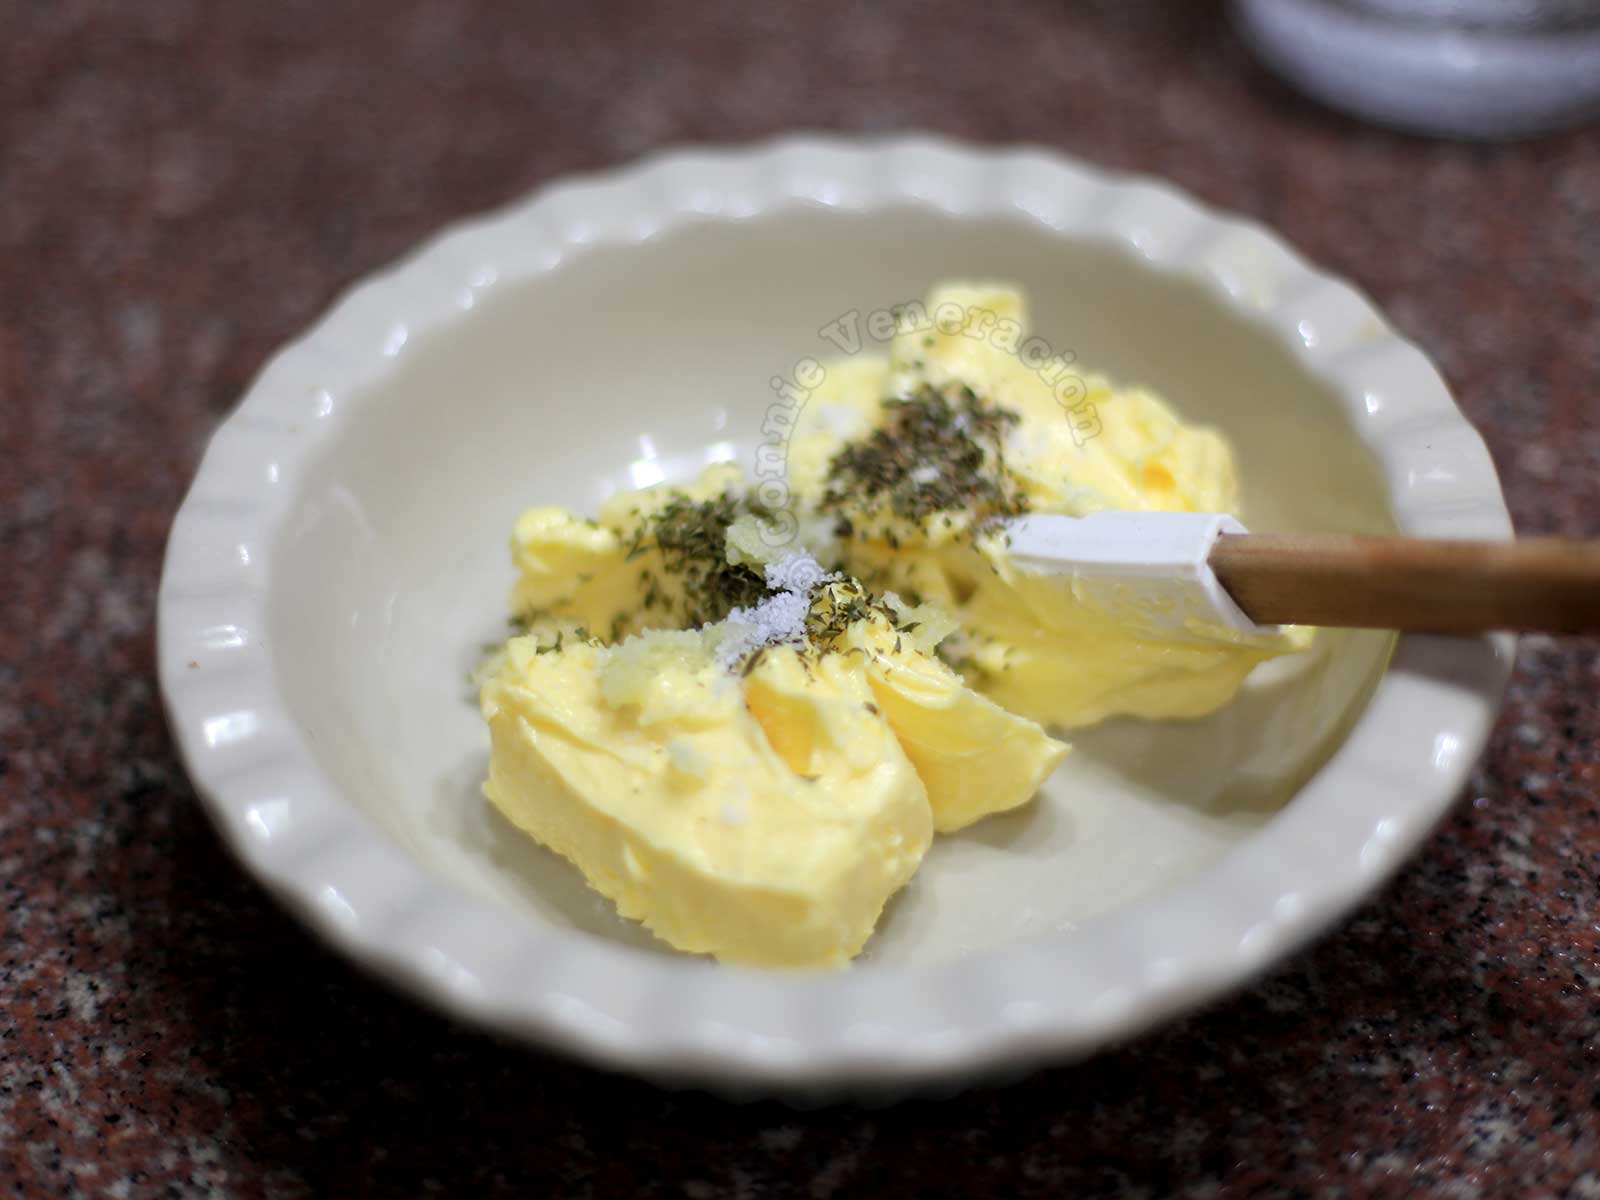 Stirring dried herbs and spices into softened butter